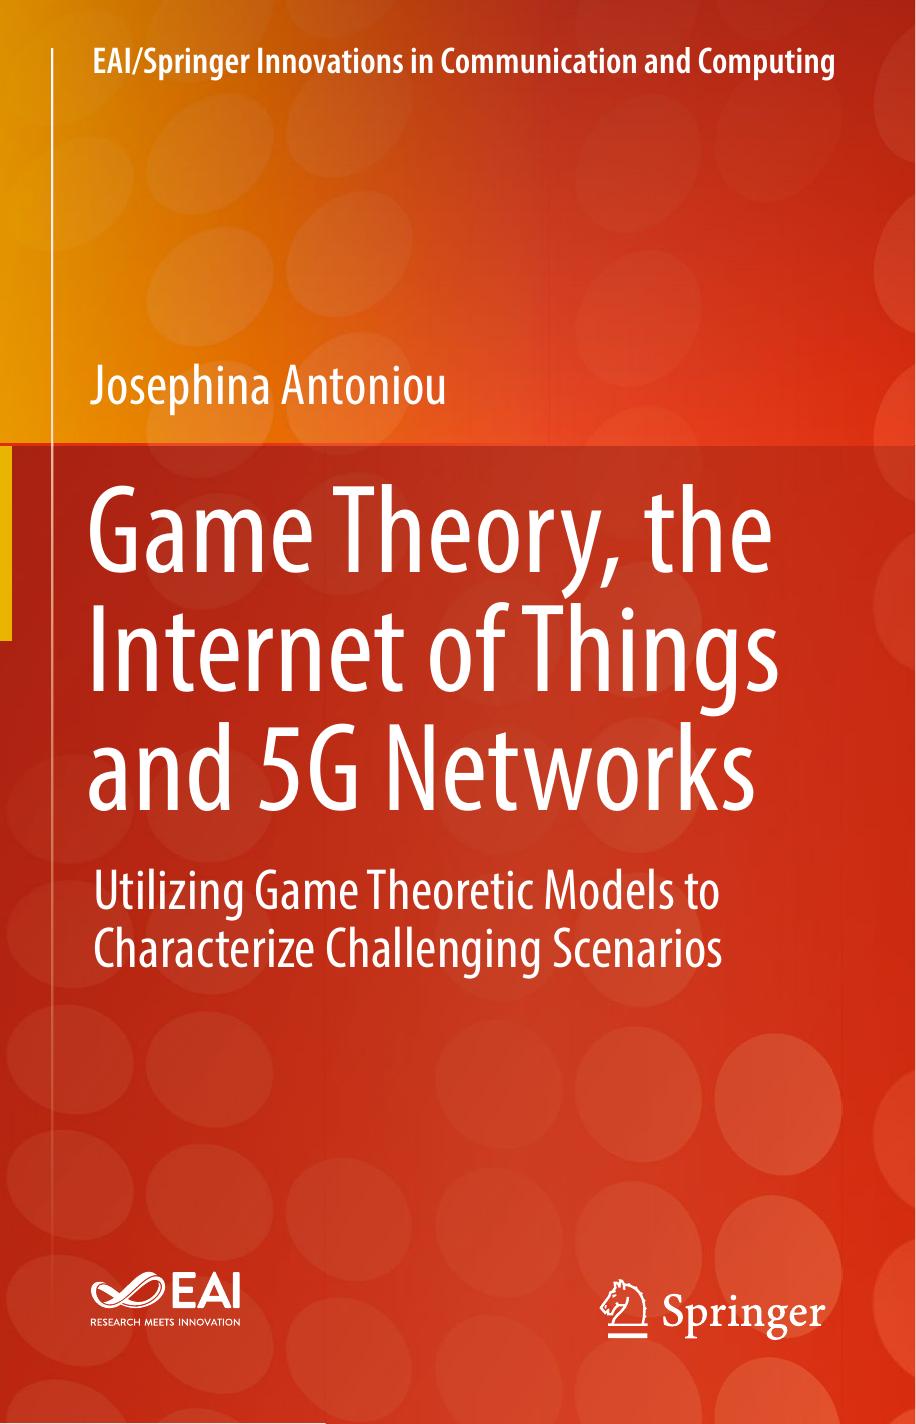 Game Theory, the Internet of Things and 5G Networks: Utilizing Game Theoretic Models to Characterize Challenging Scenarios